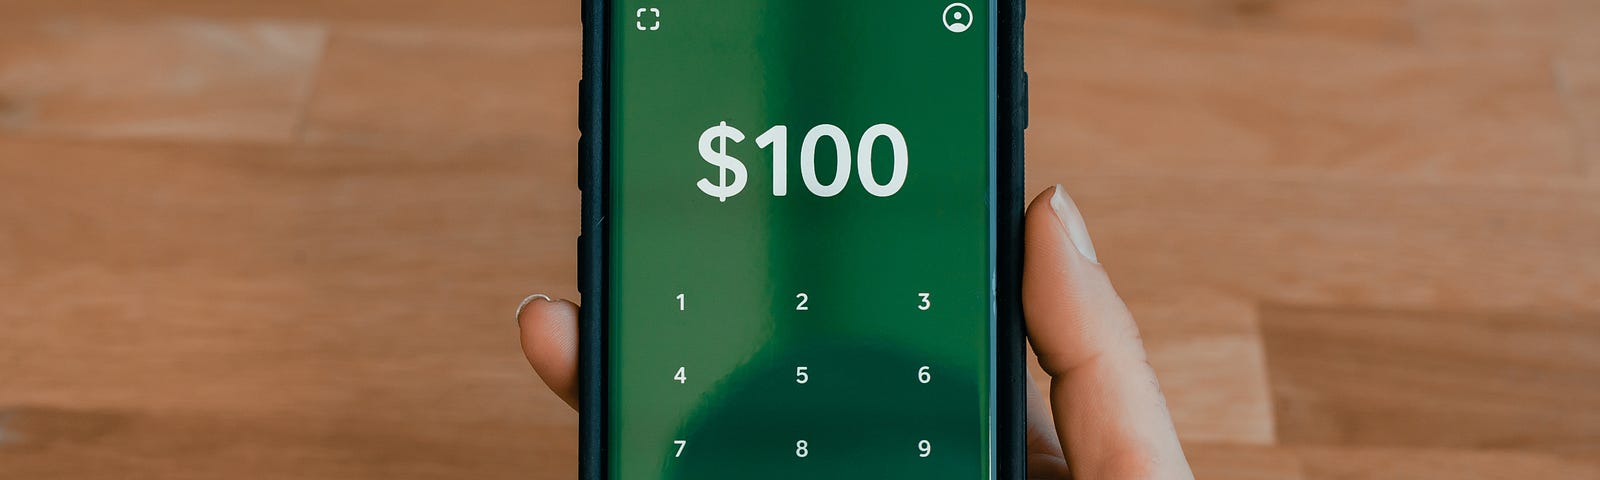 Online payment app on a mobile with $100 written on it.